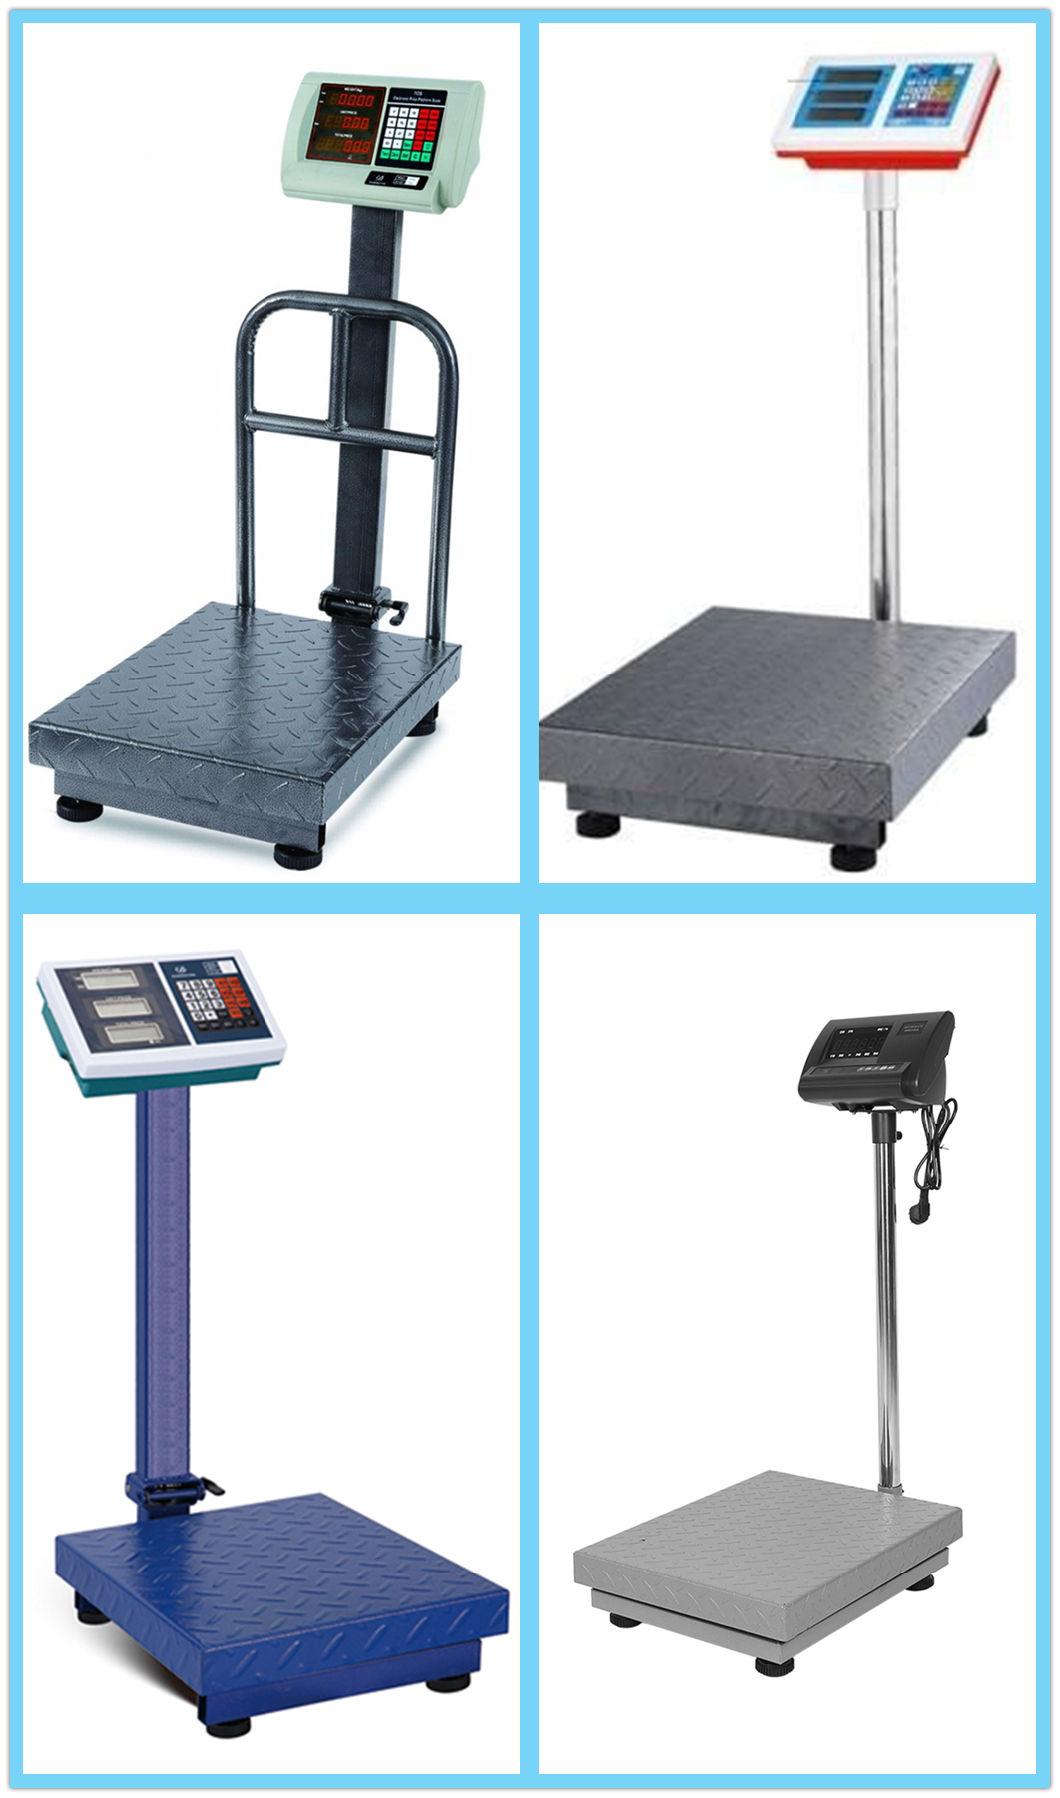 Competitive Electronic Weighing Scales Digital Platform Scales Chinese Electronic Weighing Scales